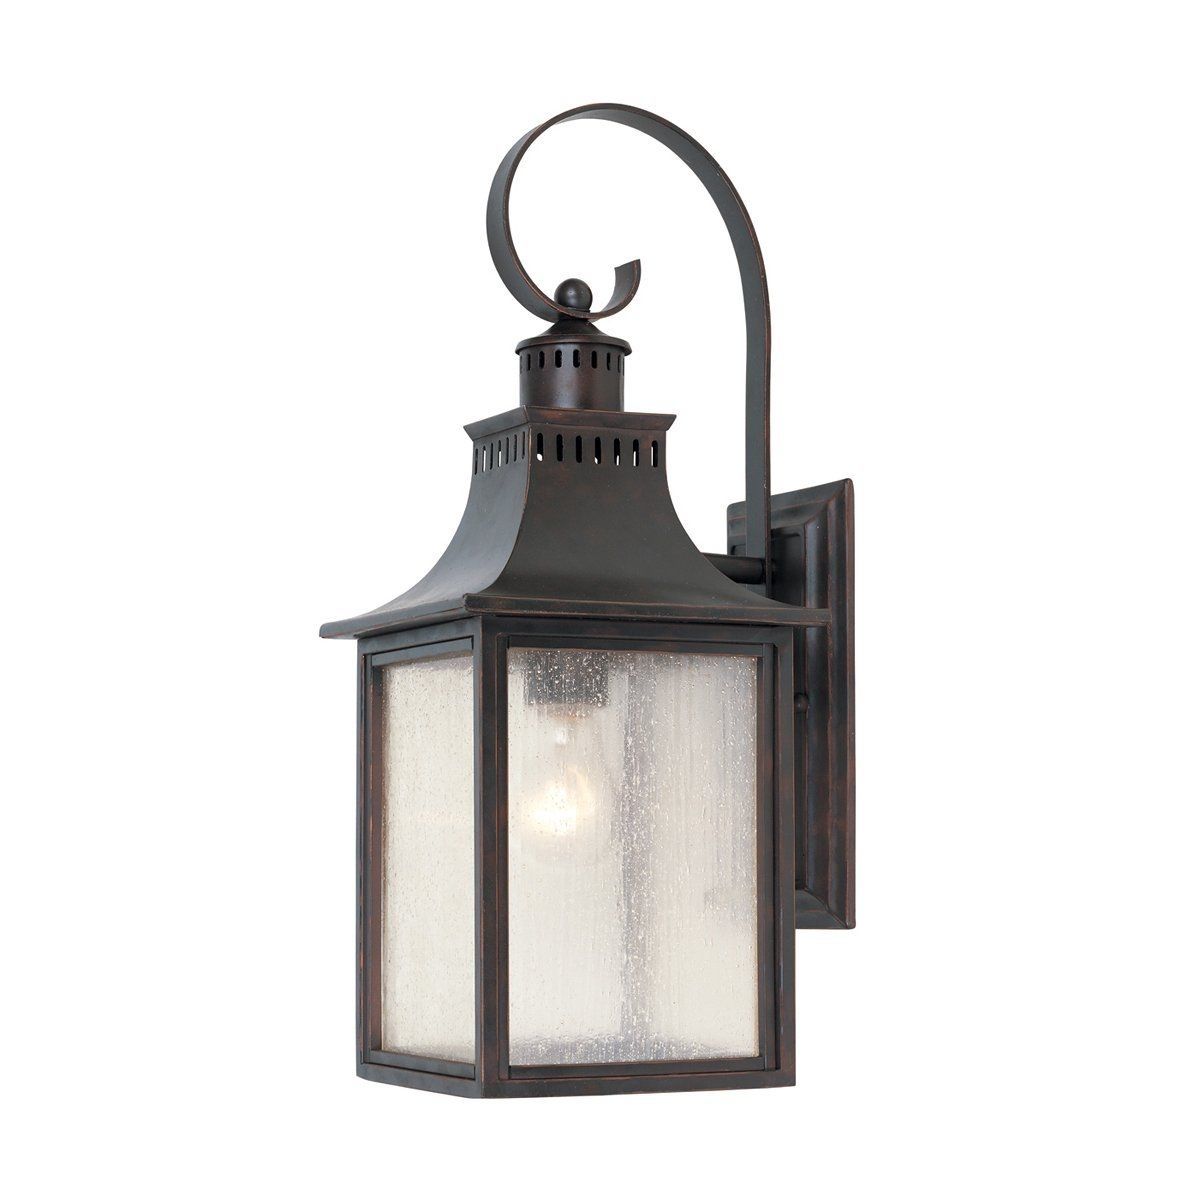 Savoy House 5 258 Monte Grande Small Outdoor Sconce At Atg Stores With Outdoor Wall Lighting At Houzz (Photo 11 of 15)